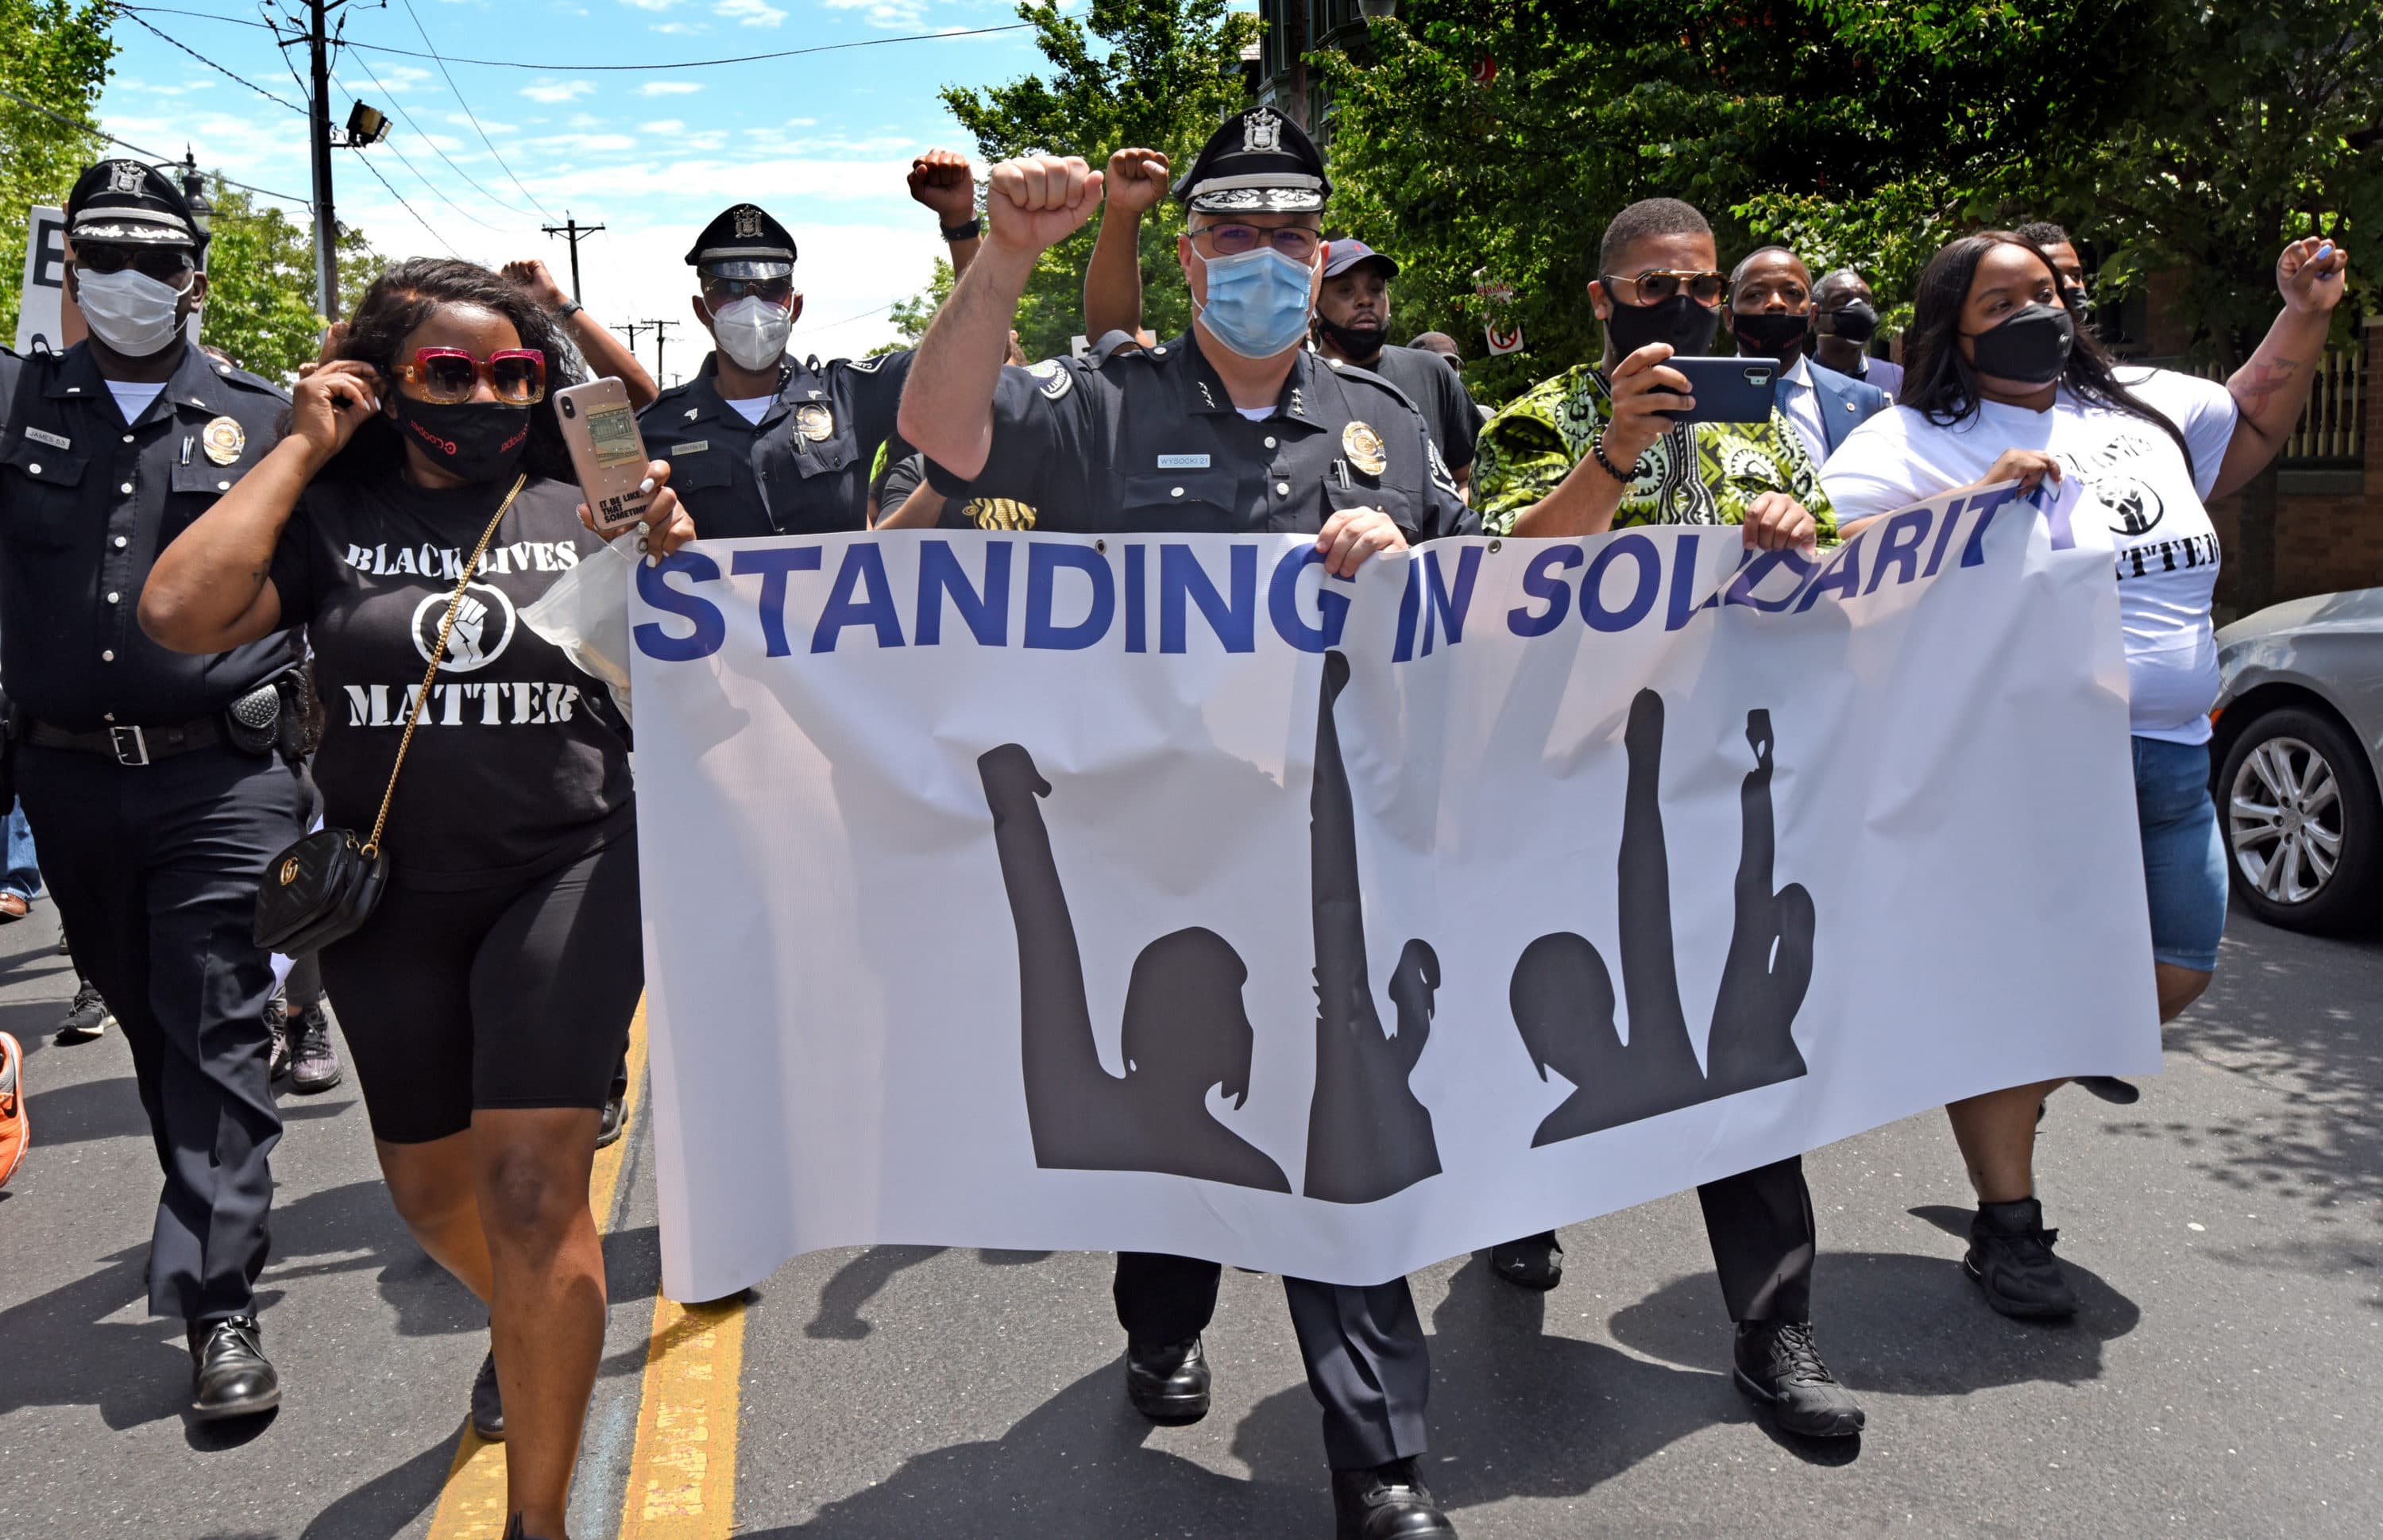 On May 30, 2020, Camden County Metro Police Chief Joe Wysocki raises a fist while marching with Camden residents and activists to protest the killing of George Floyd in Minneapolis. (Photo by April Saul)